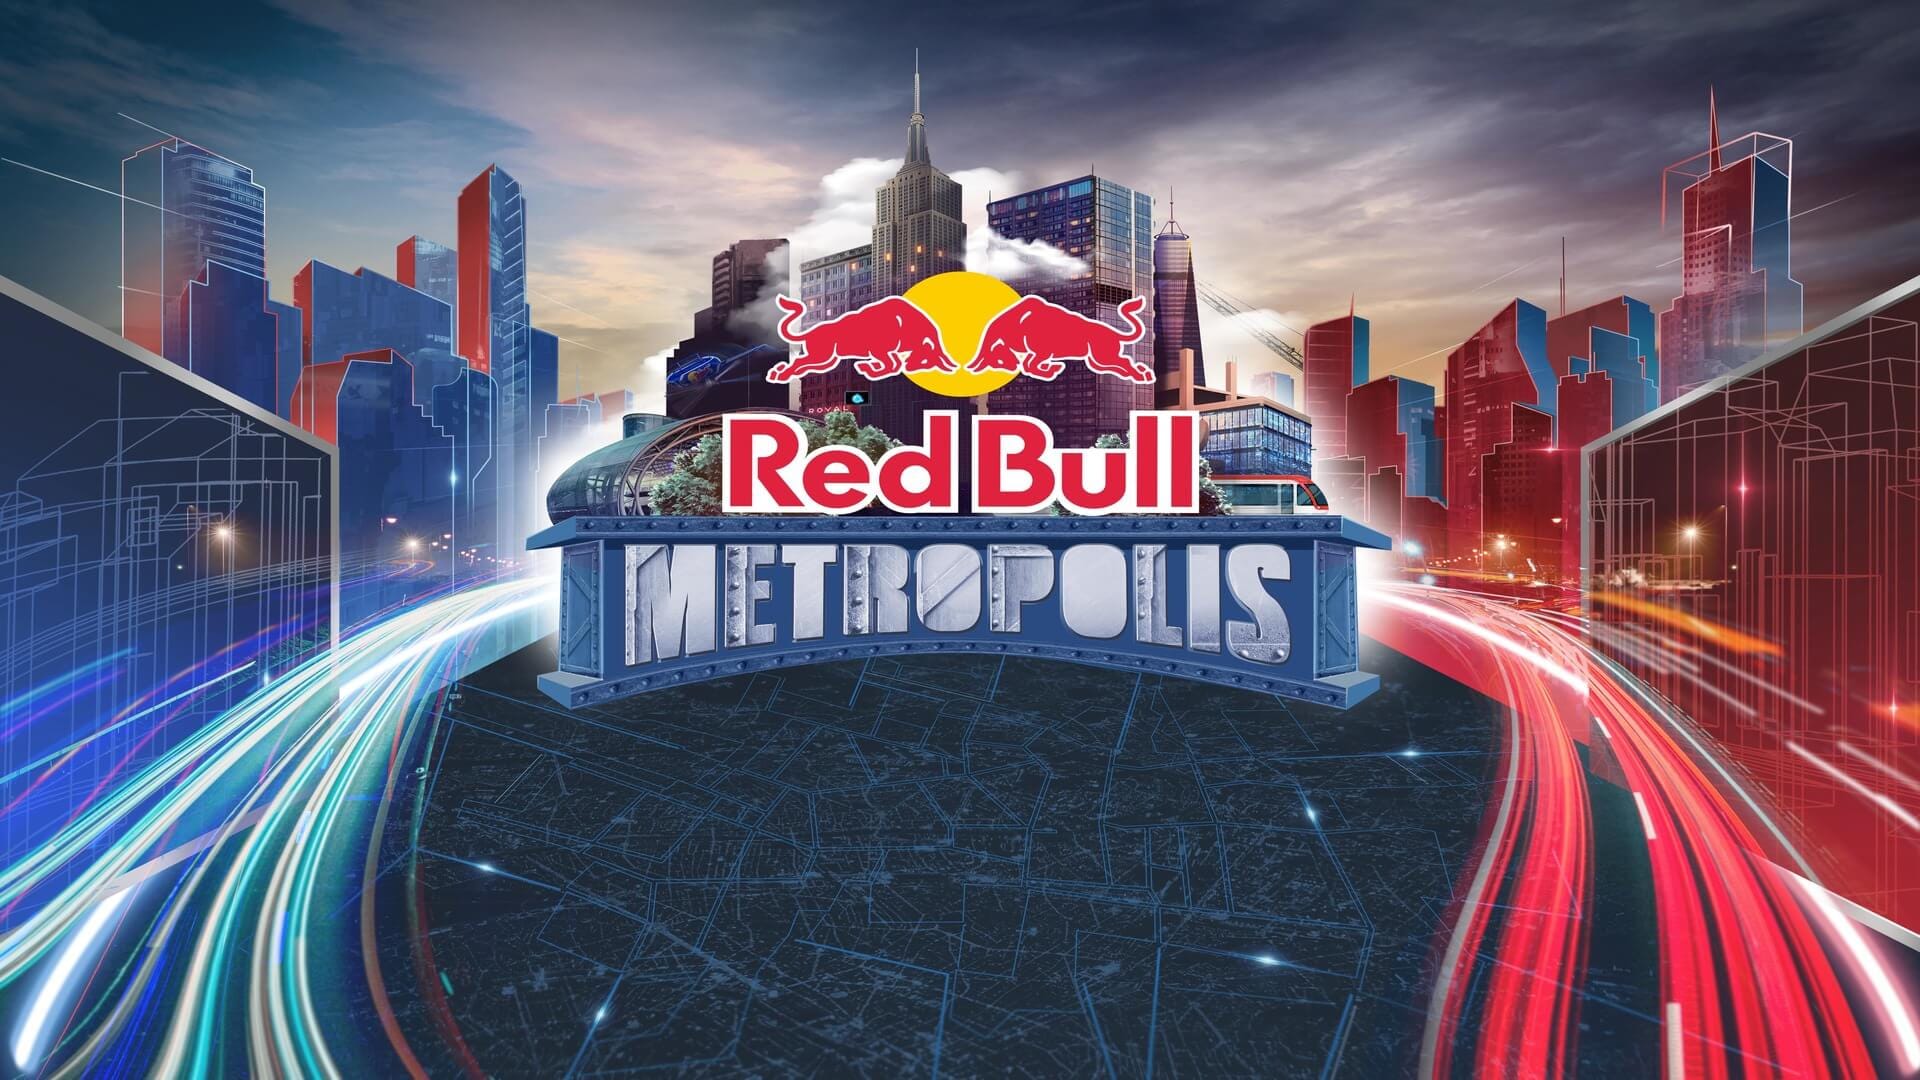 The logo for Red Bull Metropolis, a major competitive event for Cities: Skylines.